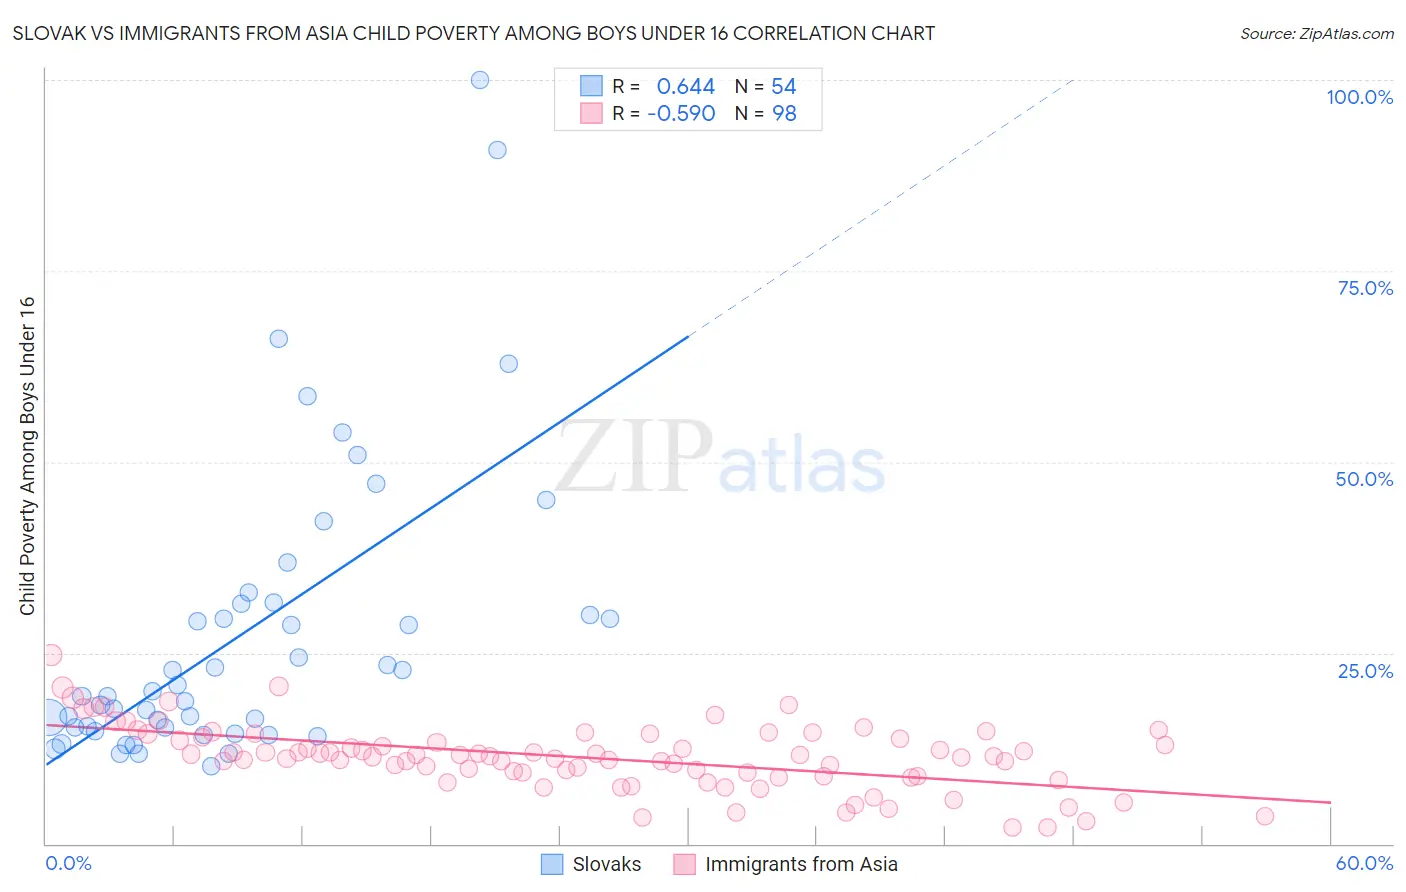 Slovak vs Immigrants from Asia Child Poverty Among Boys Under 16